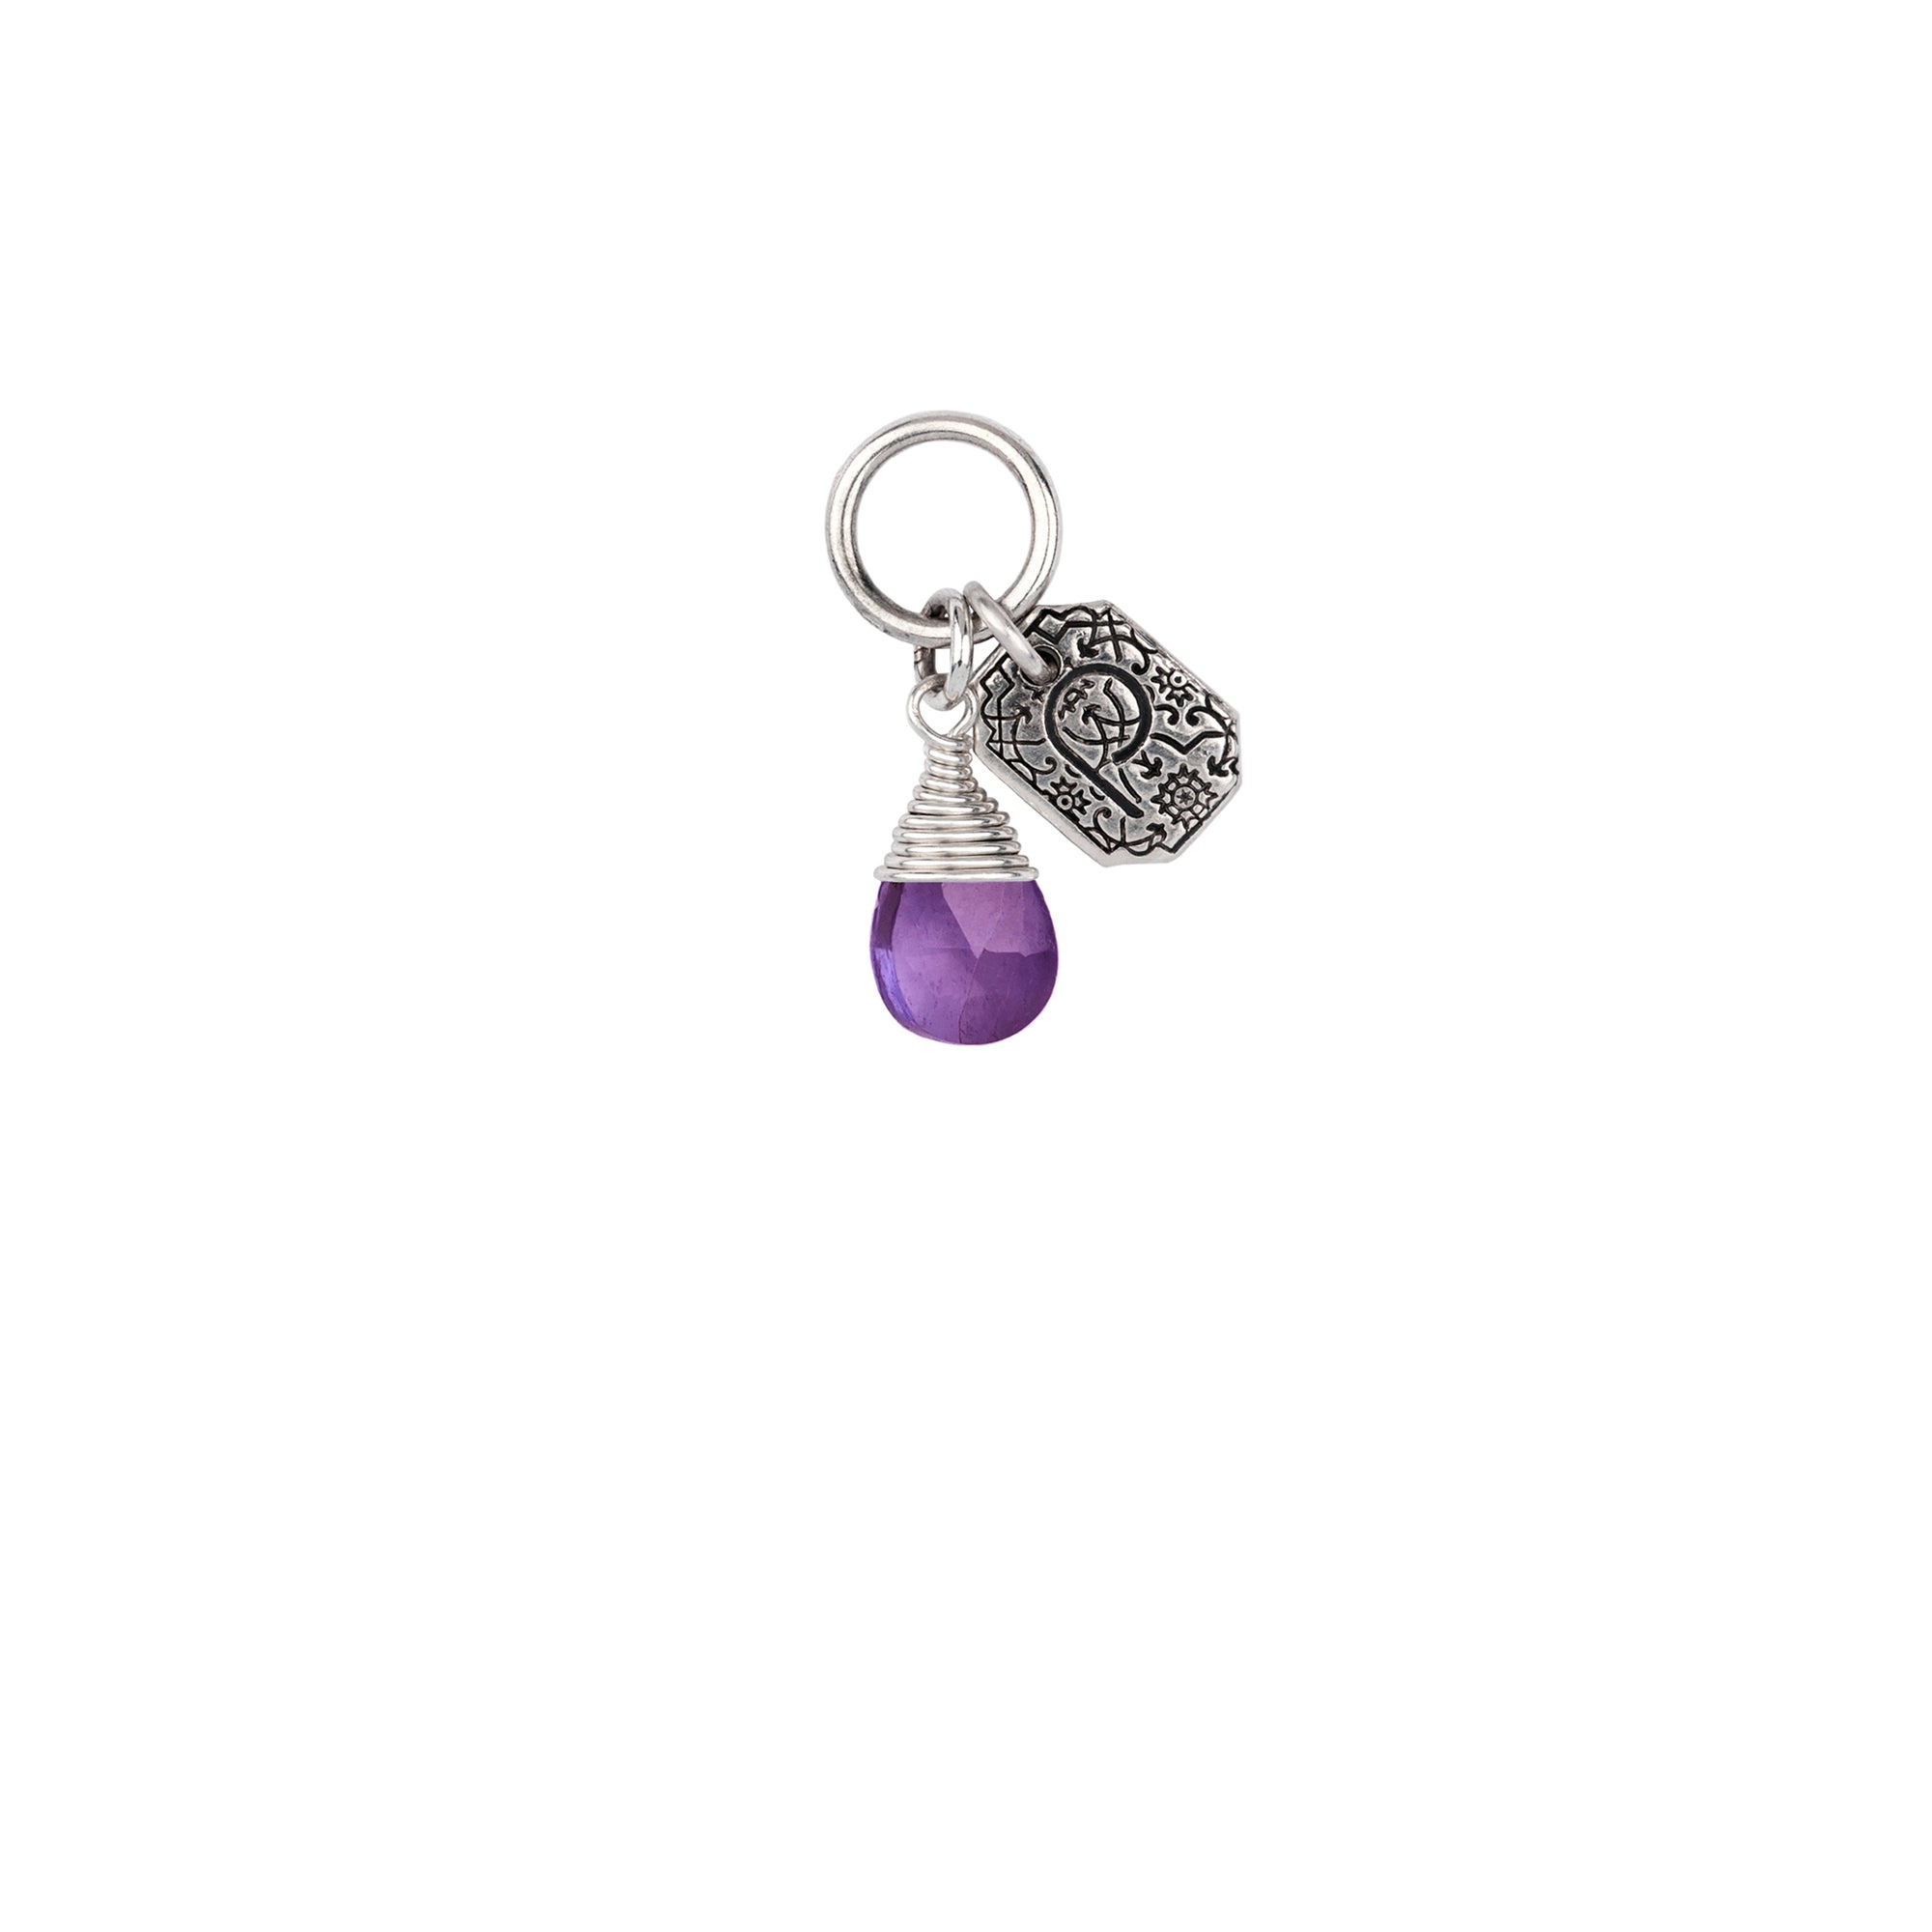 A signature sterling silver attraction charm capped with an amethyst stone.